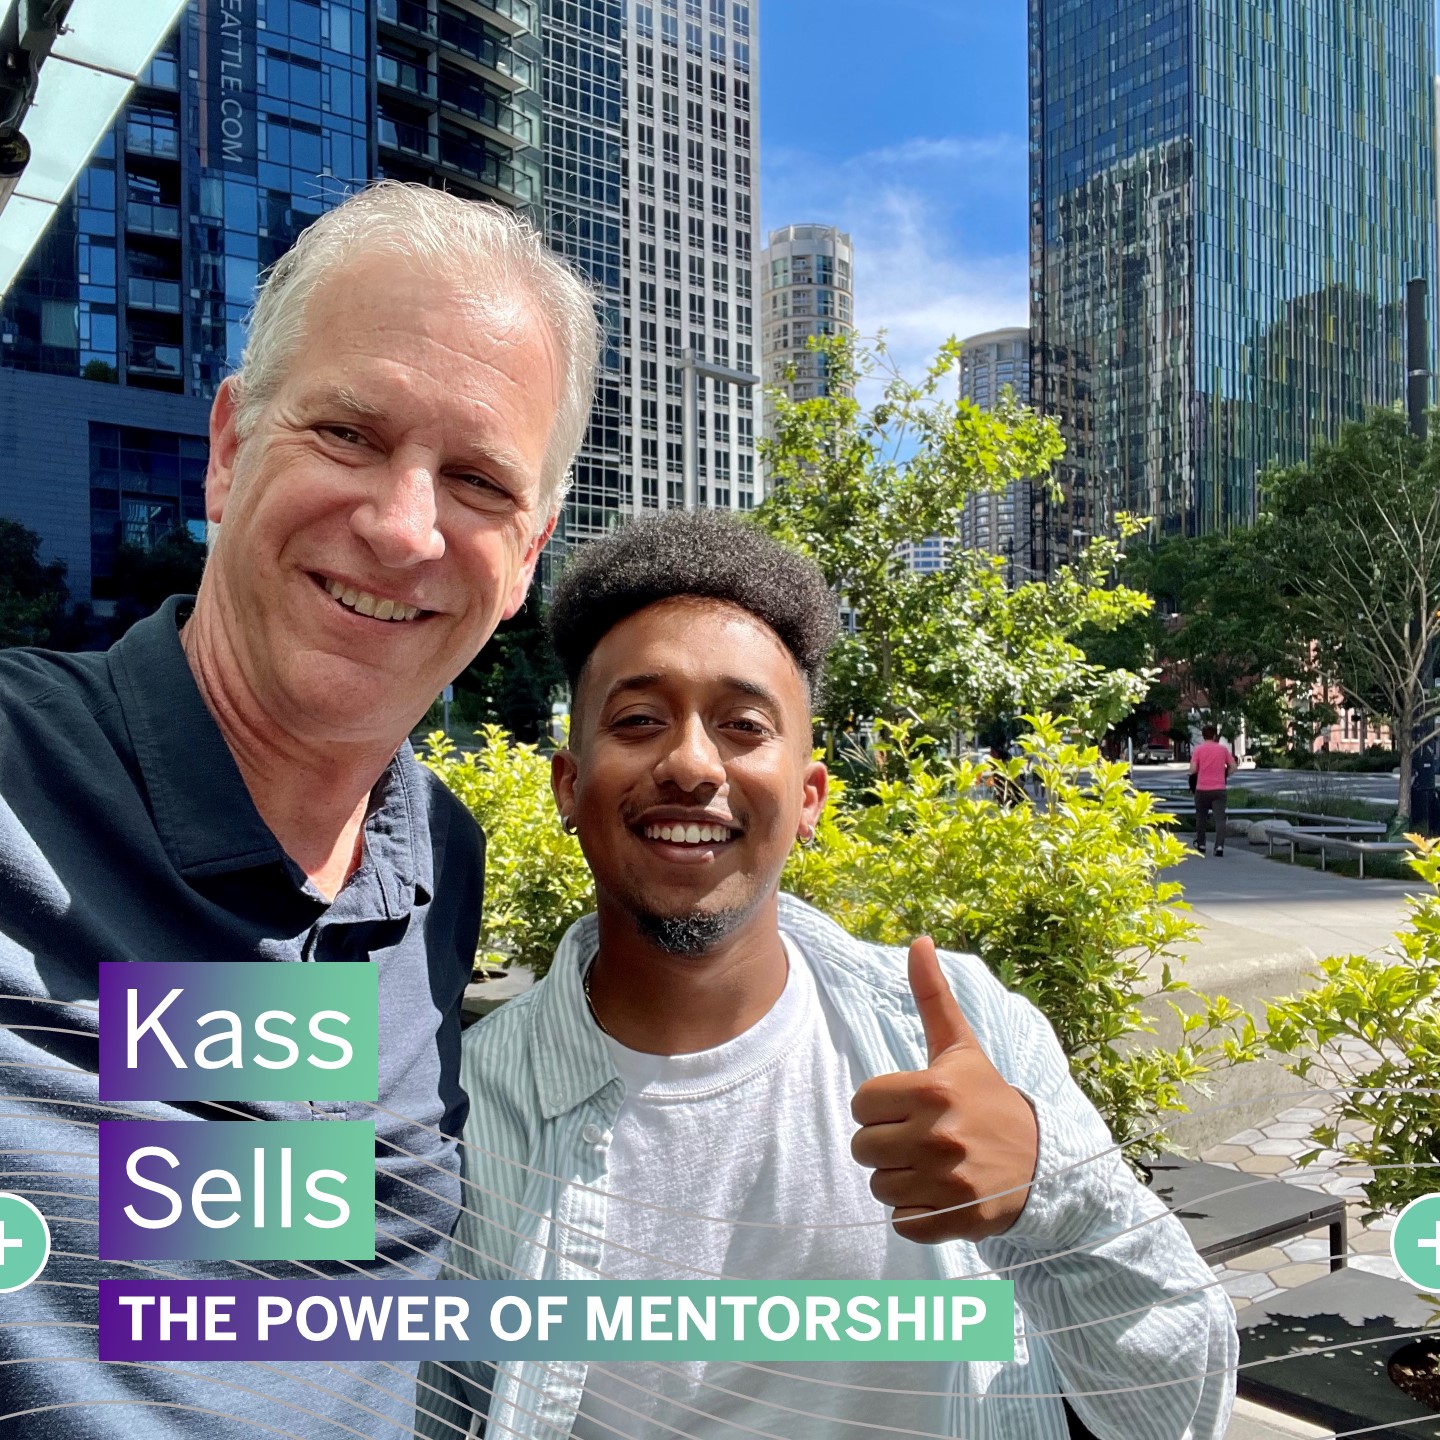 Kass Sells: The Power of Mentorship